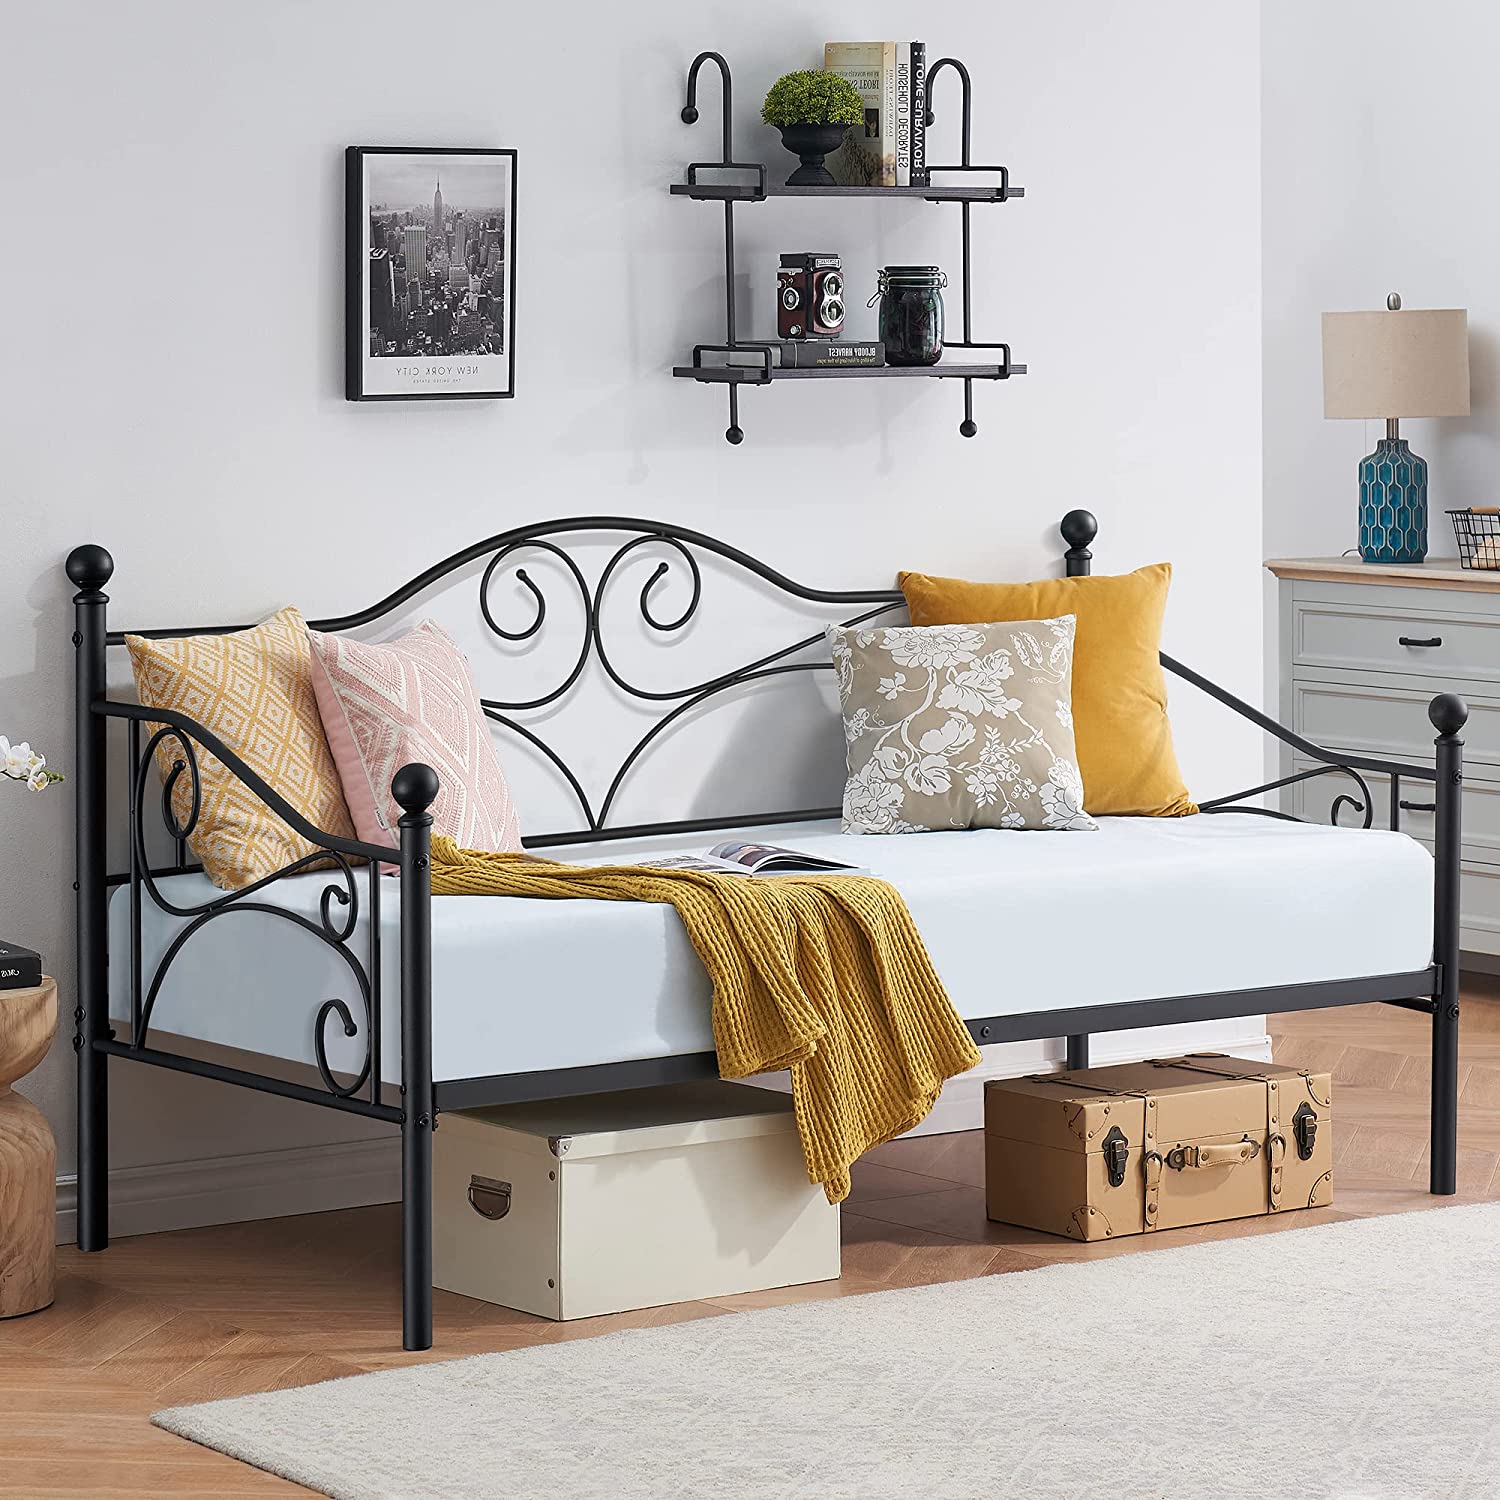 VECELO Premium Daybed Metal Twin Bed Frame with Headboard, Heavy Duty Steel Slats Support for Living Room Bedroom Guest Room